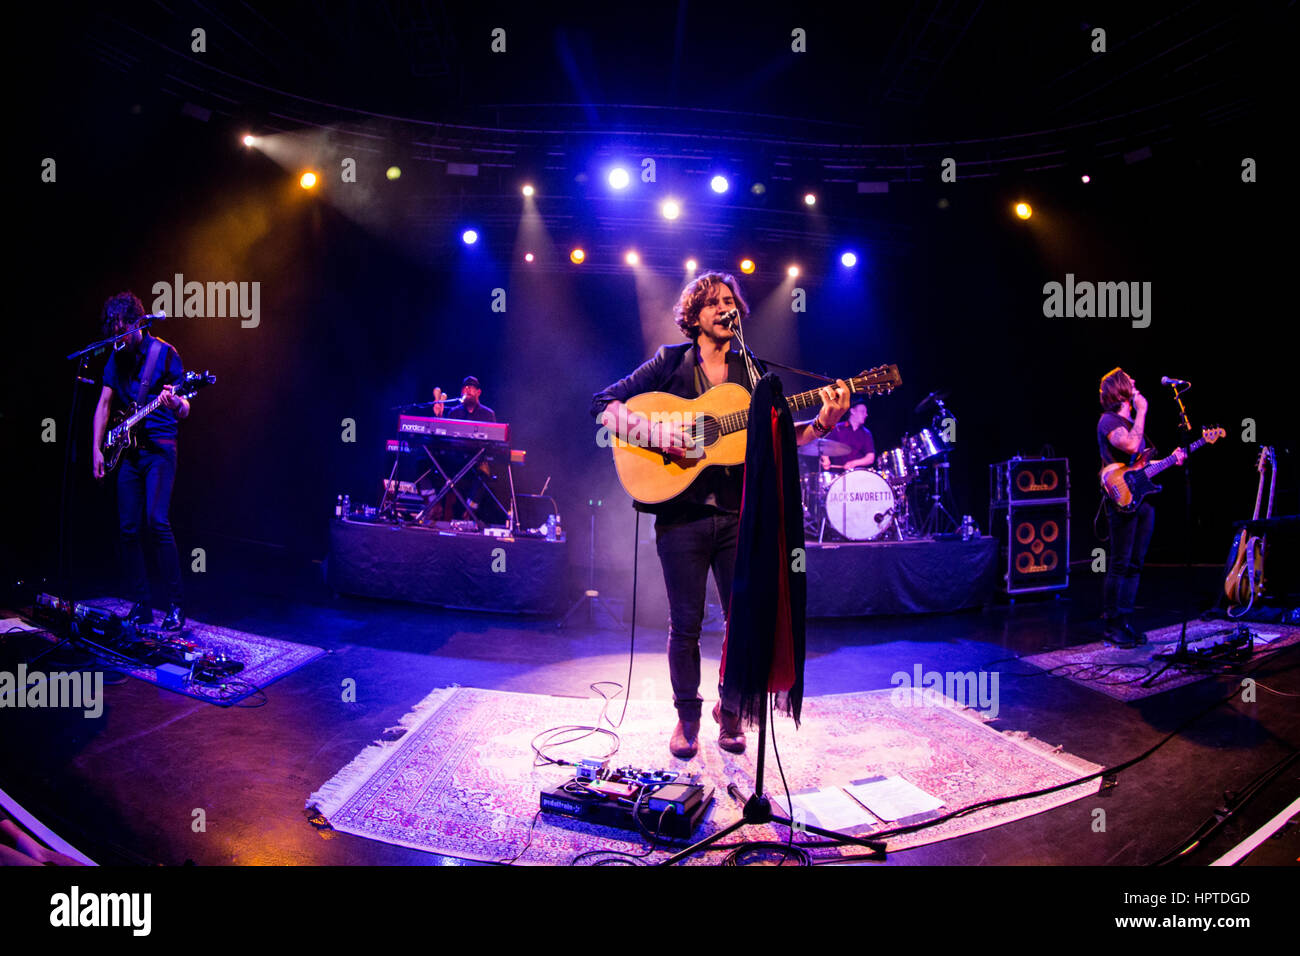 Milan, Italy. 24th Feb, 2017. The English singer-songwriter JACK SAVORETTI performs live on stage at Fabrique during the 'Sleep No More Tour' Credit: Rodolfo Sassano/Alamy Live News Stock Photo